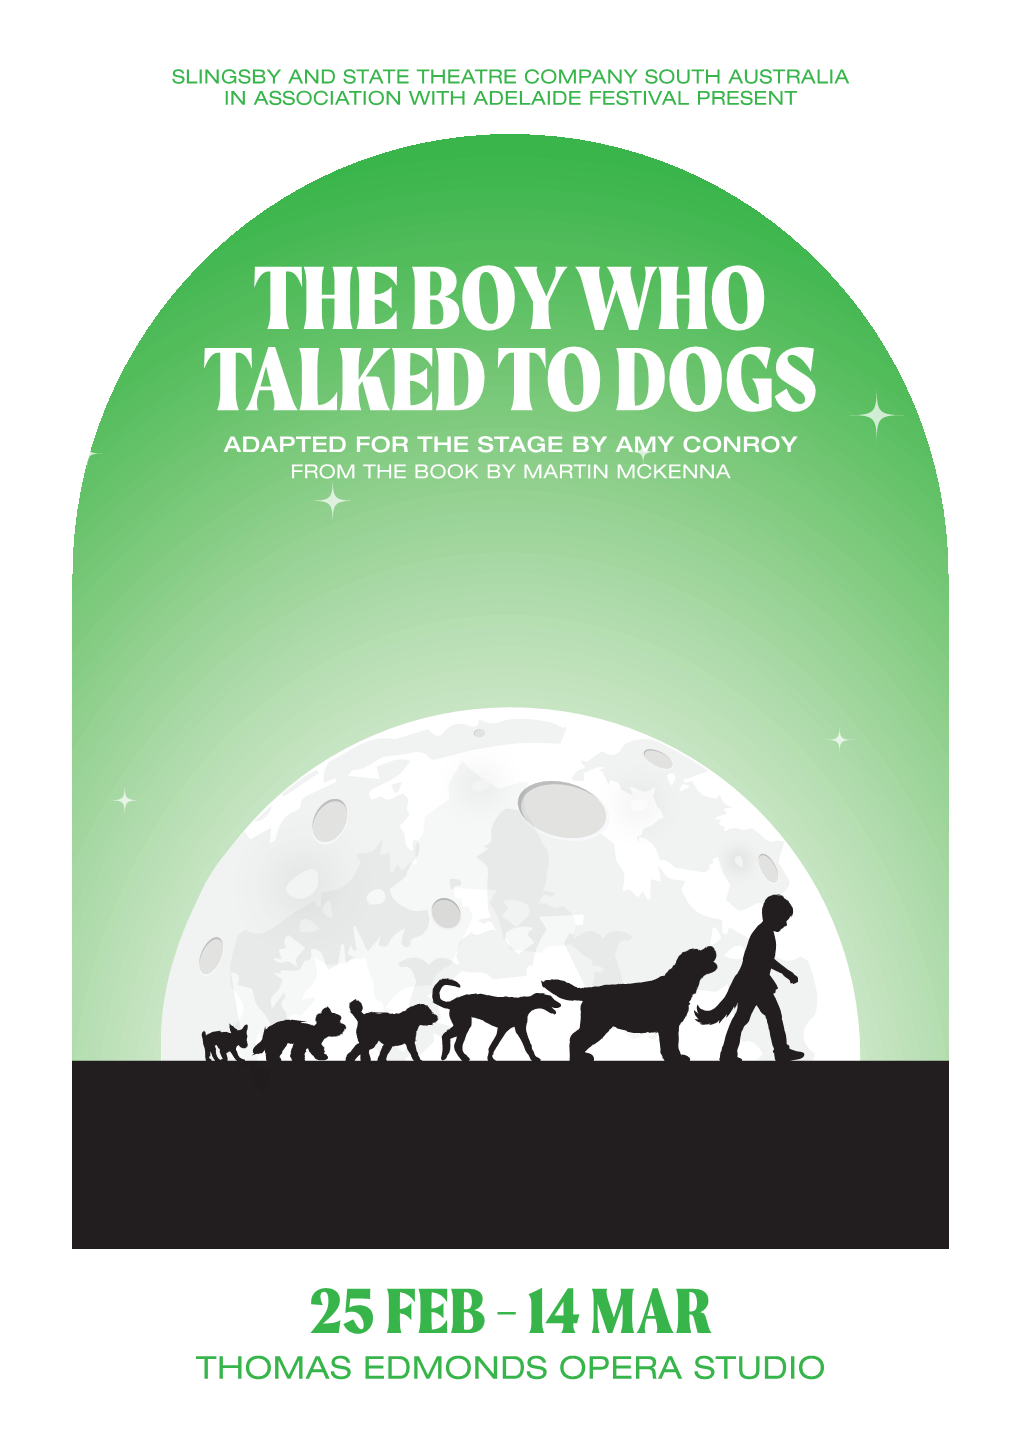 The Boy Who Talked to Dogs Adapted for the Stage by Amy Conroy from the Book by Martin Mckenna